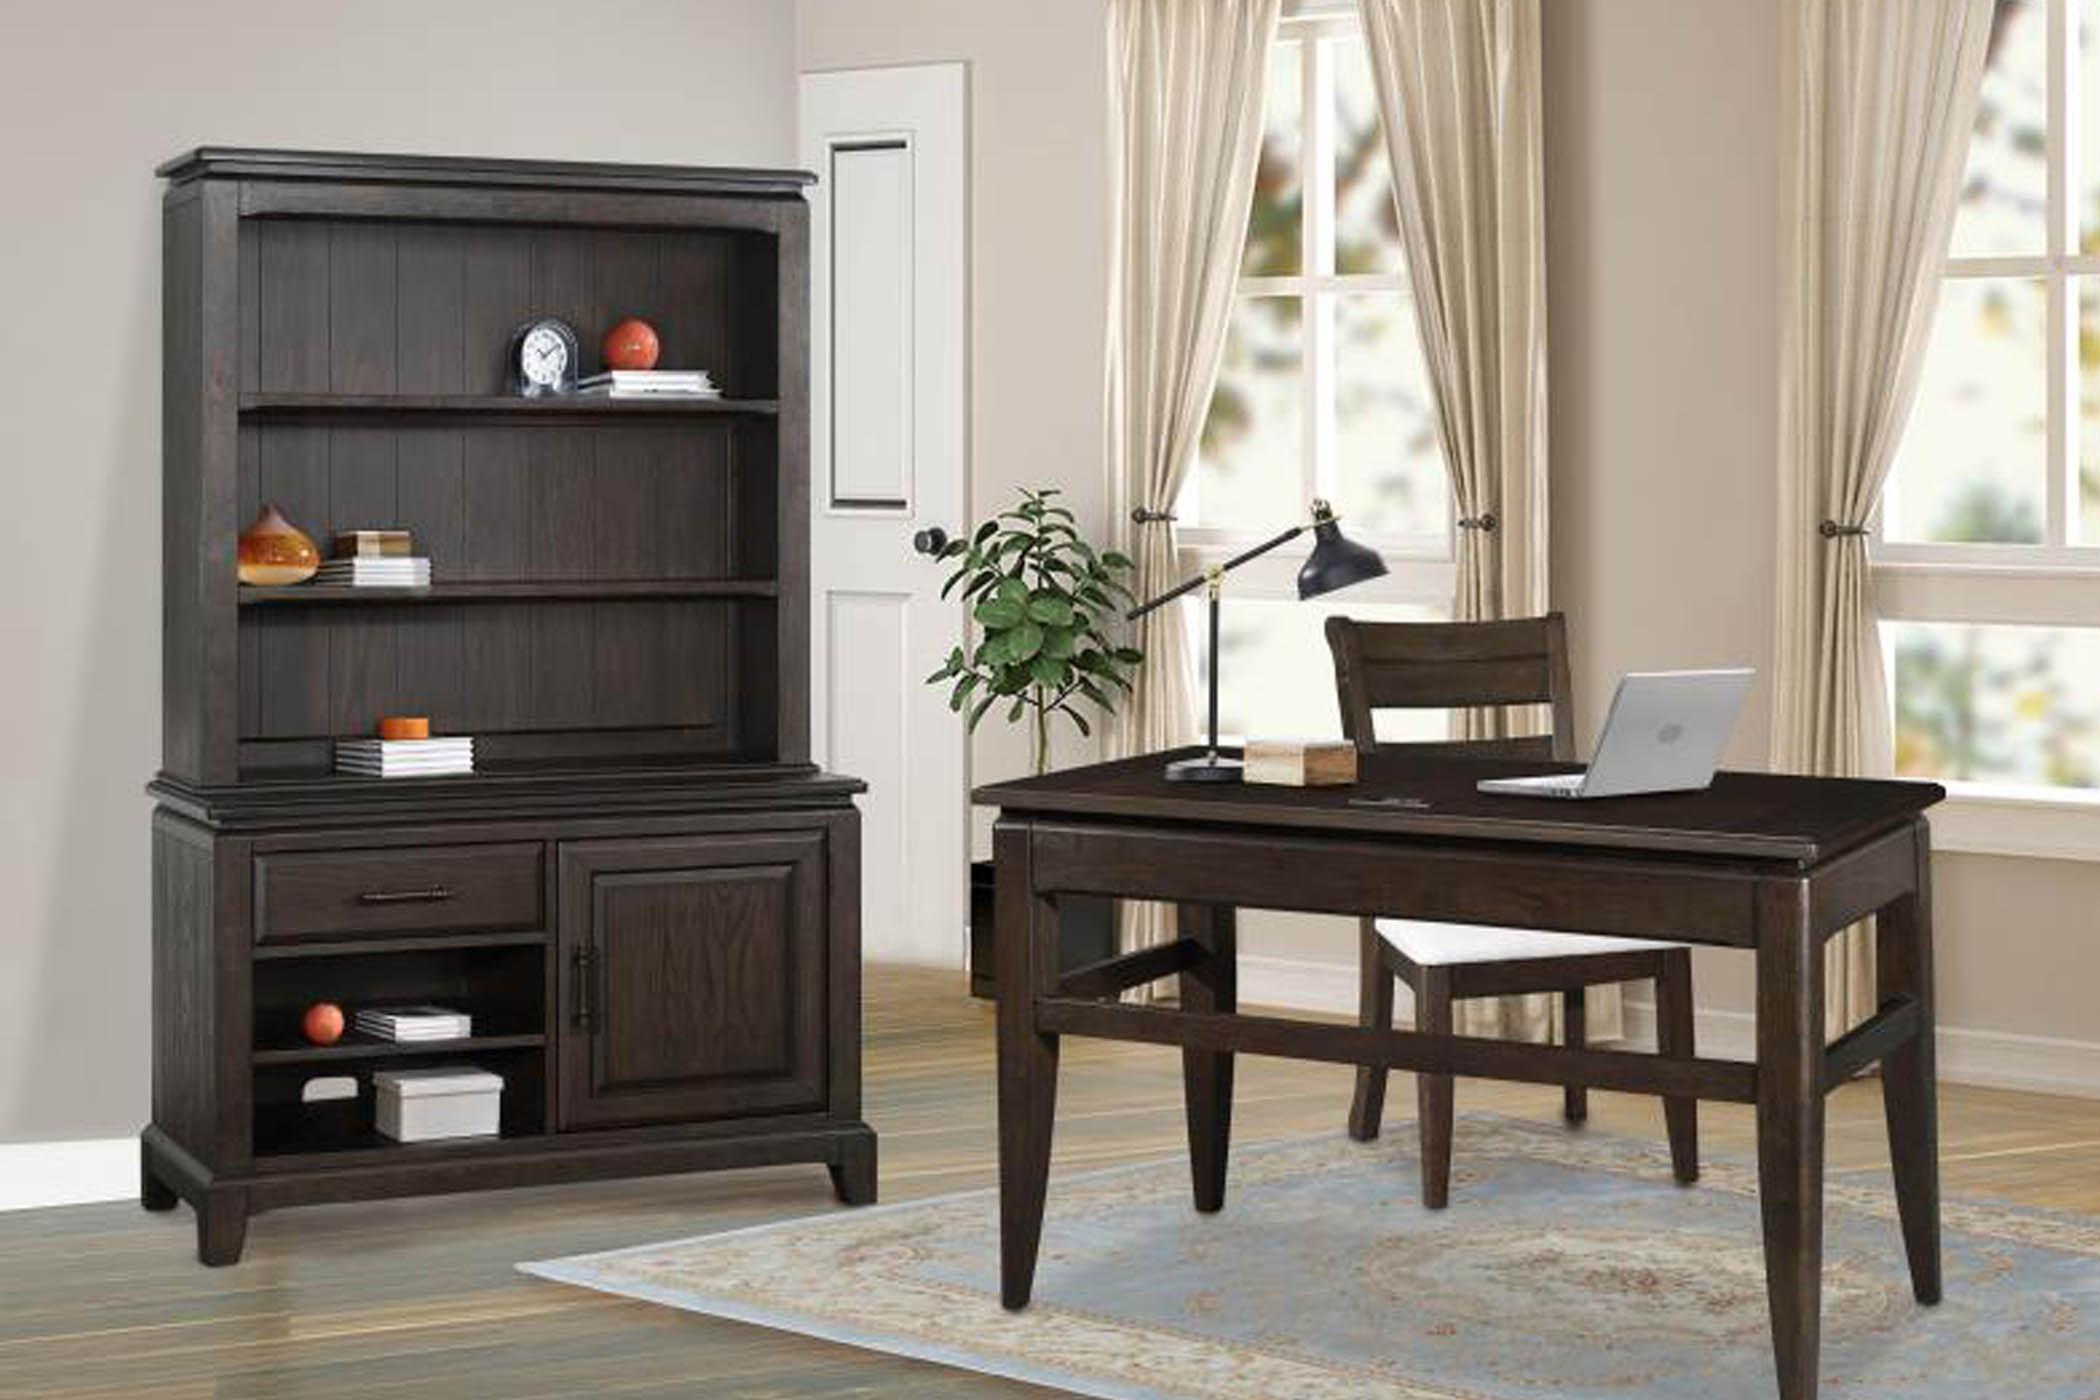 Modern, Traditional Bookcase BELLAMY 3920-072 3920-072 in Brown 